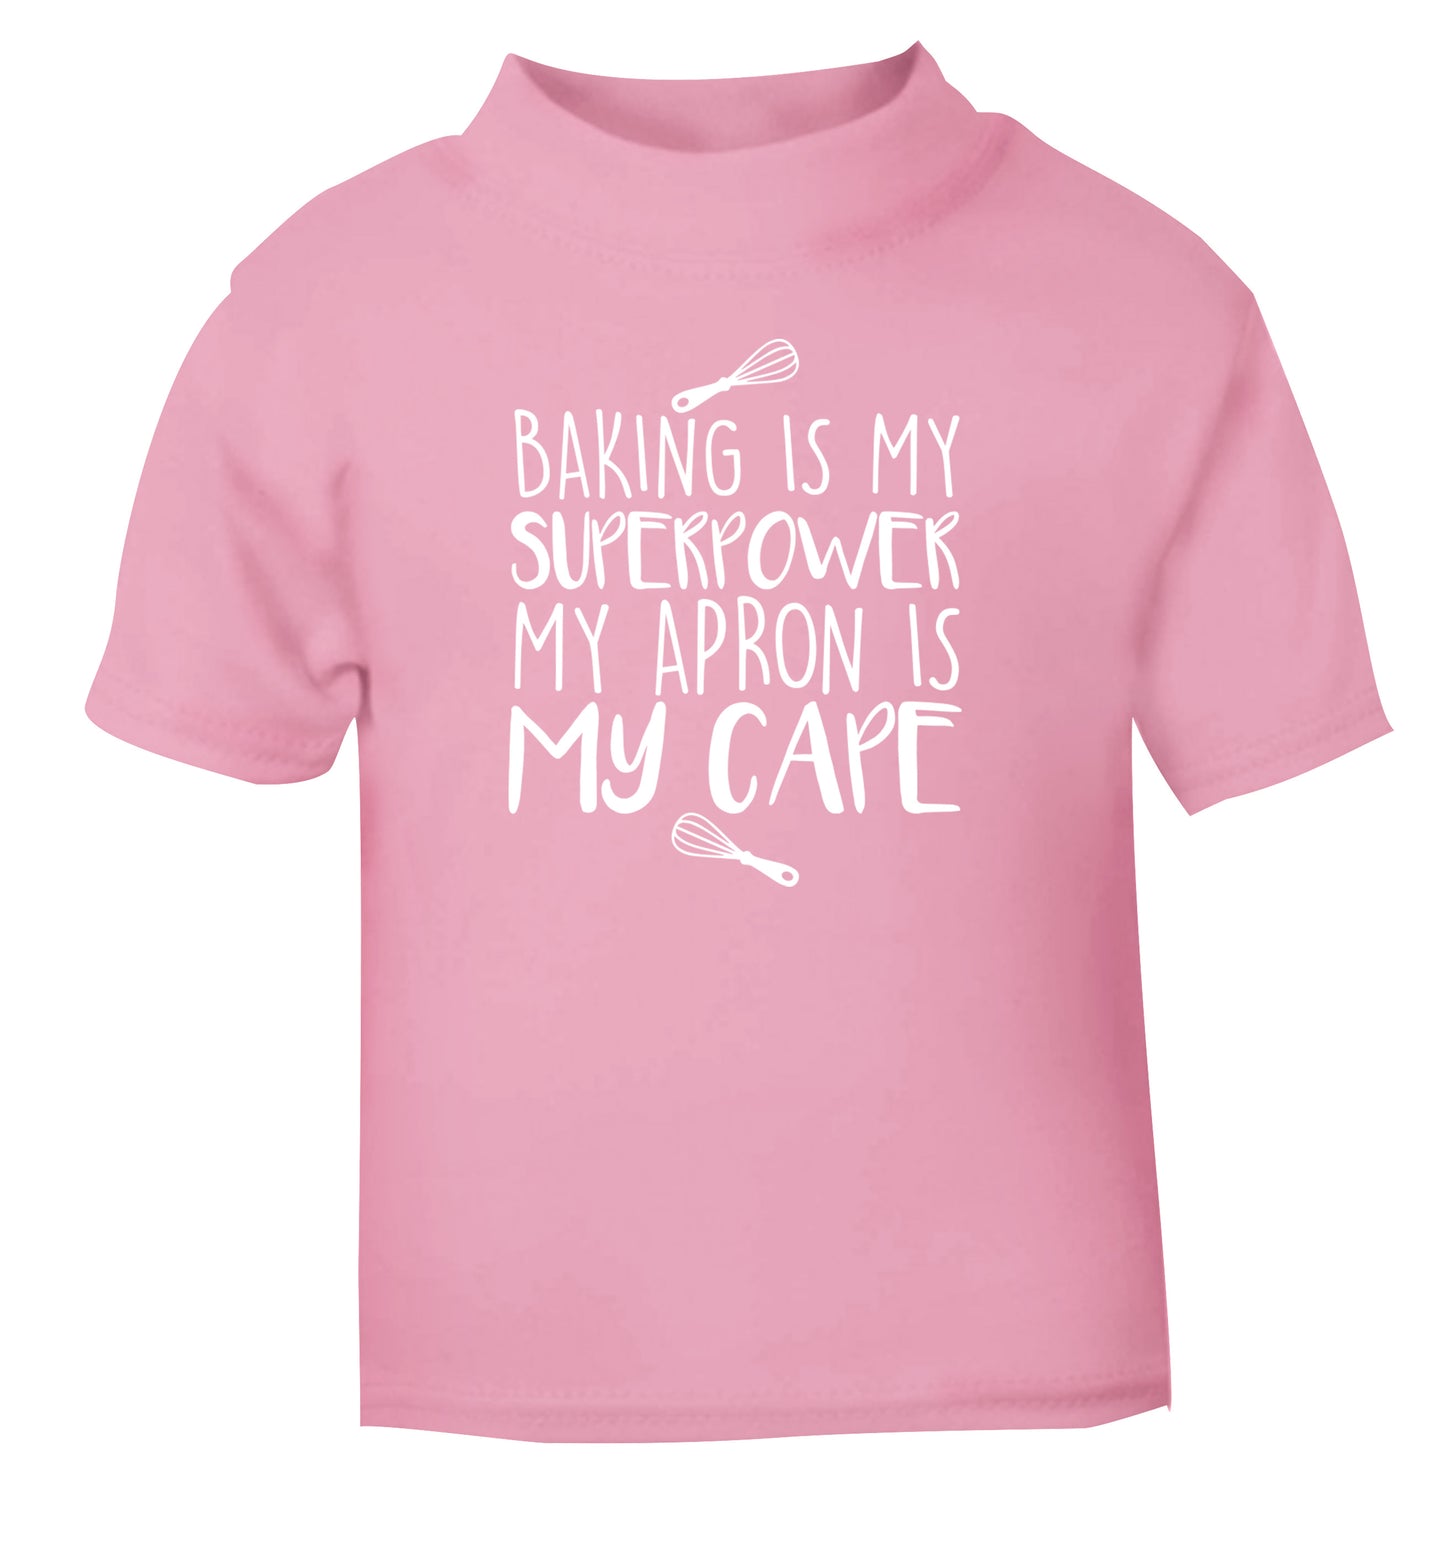 Baking is my superpower my apron is my cape light pink Baby Toddler Tshirt 2 Years